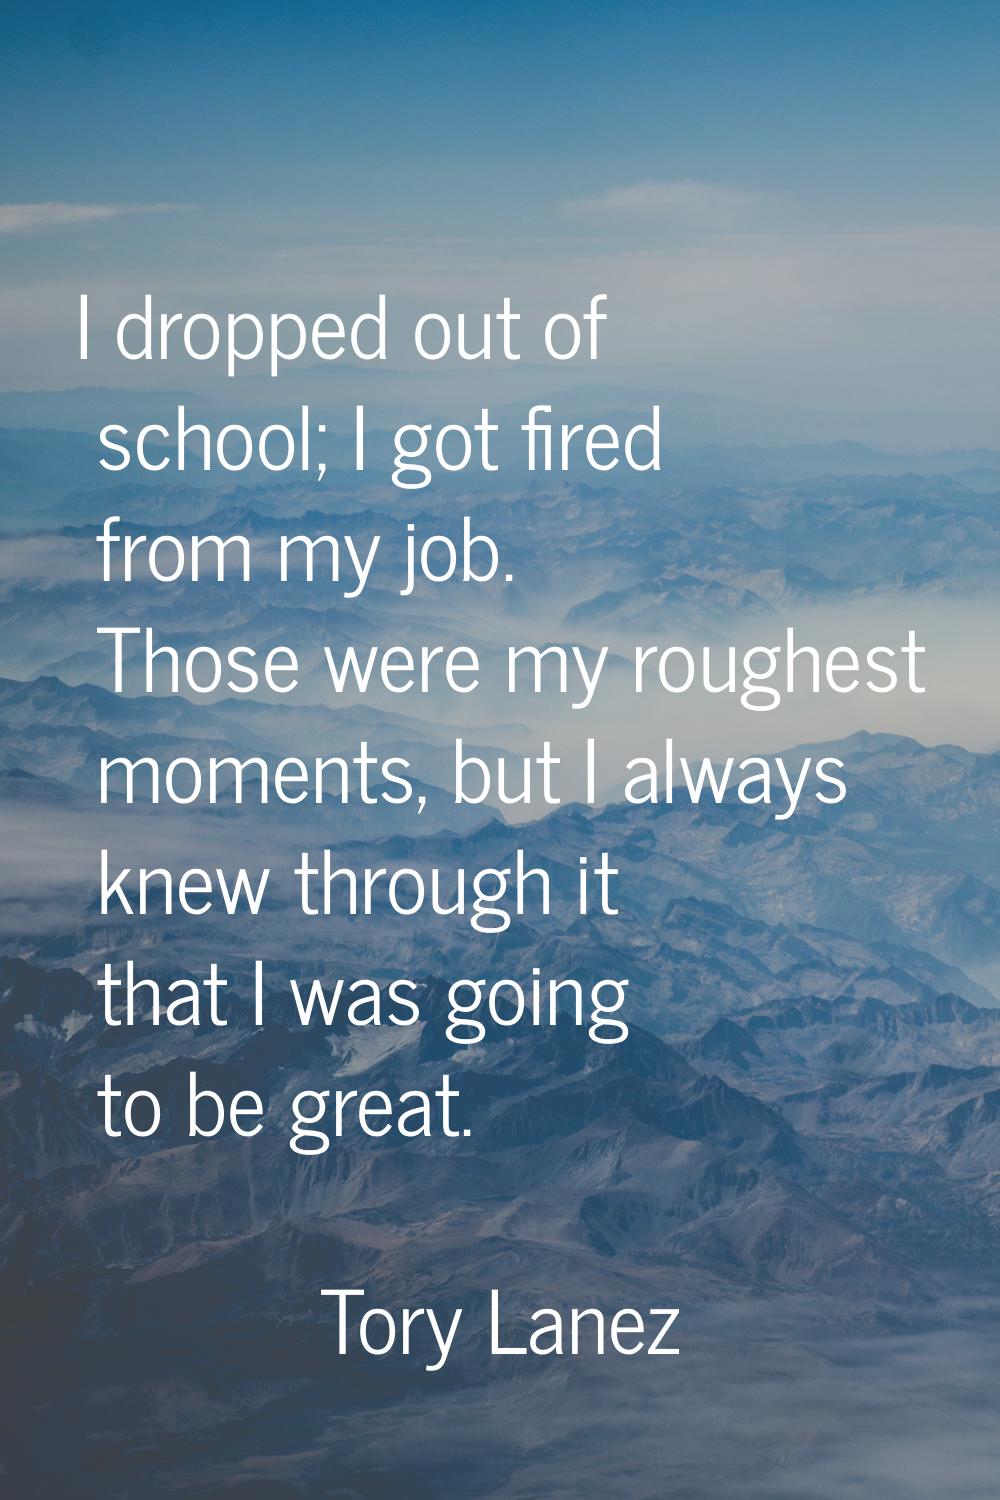 I dropped out of school; I got fired from my job. Those were my roughest moments, but I always knew